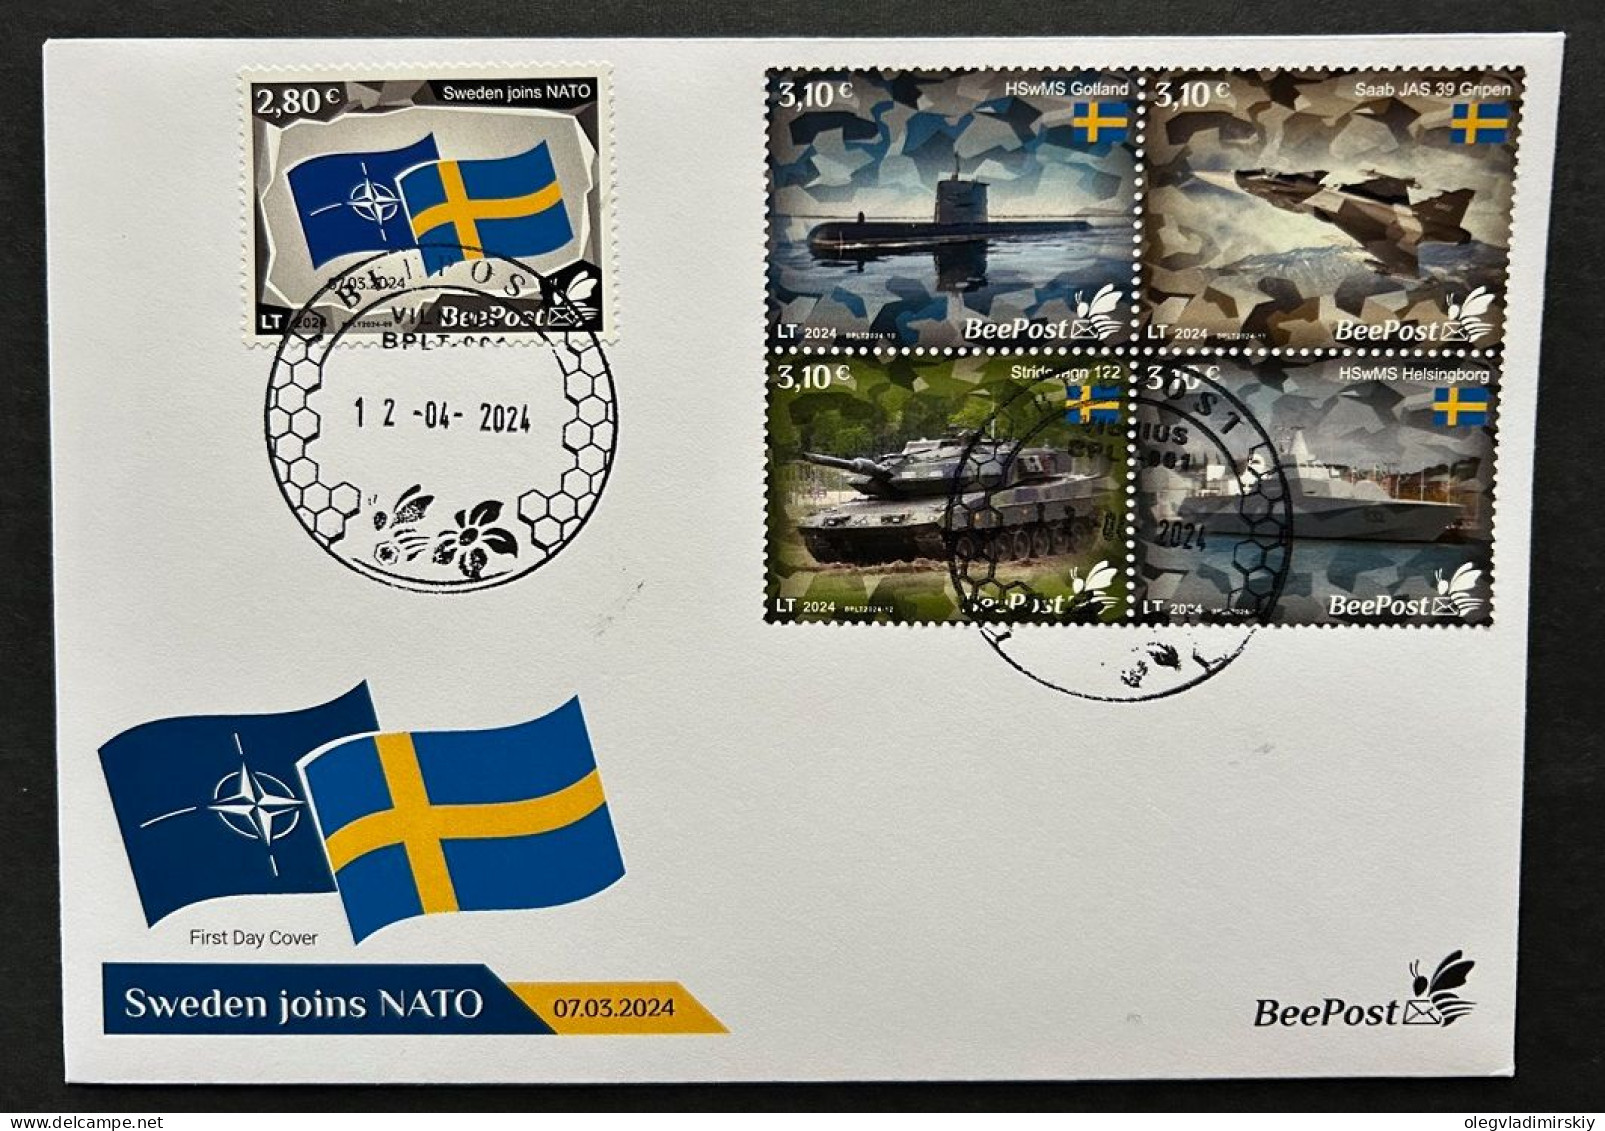 Lithuania 2024 Baltic - NATO Sea Sweden Joins NATO Tank Submarine Warship Airplane Flags BeePost Set Of 5 Stamps FDC - Sous-marins